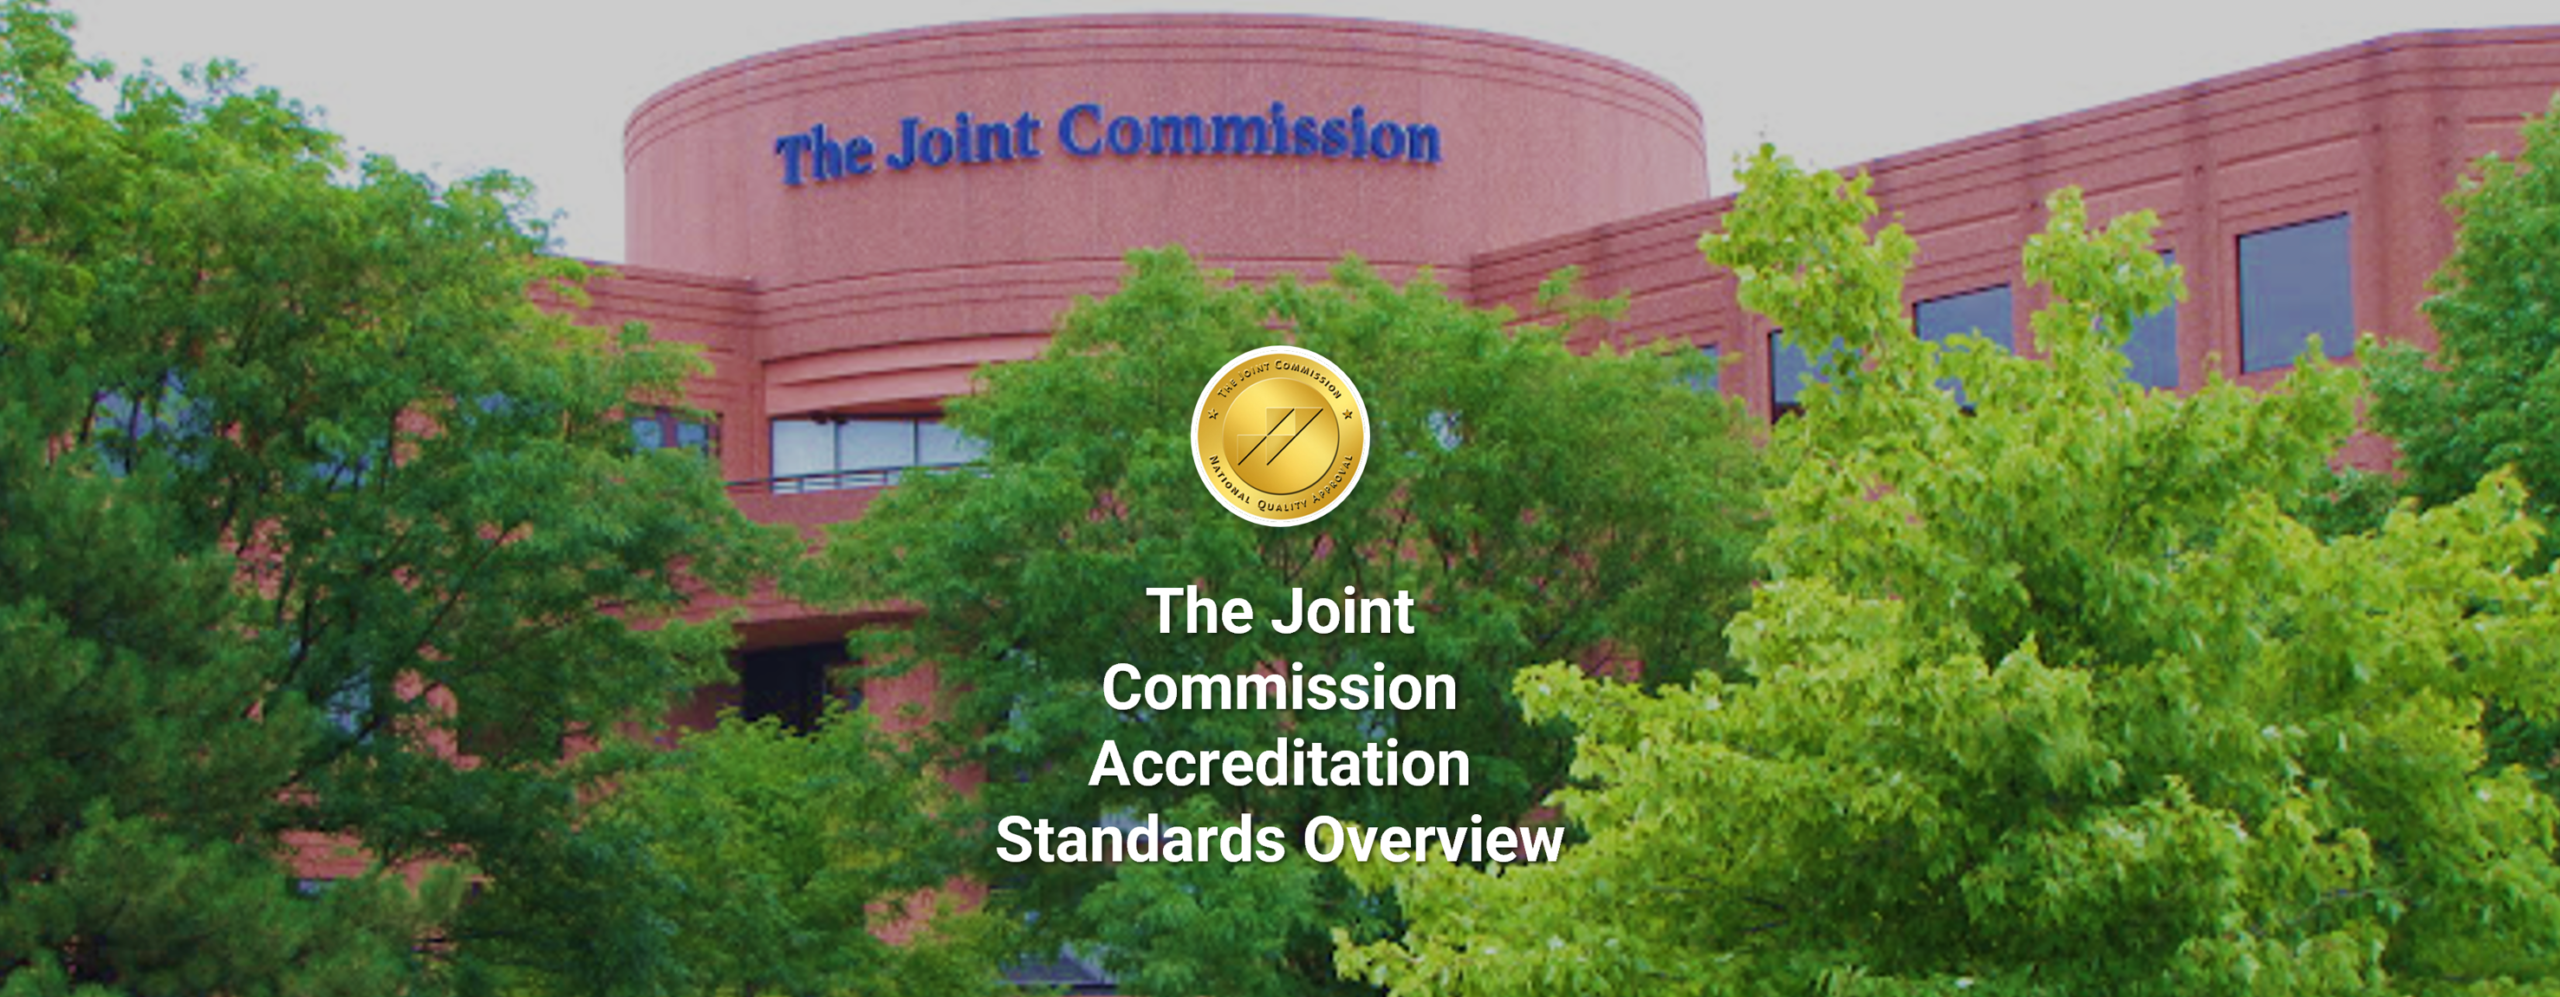 The Joint Commission Accreditation Standards